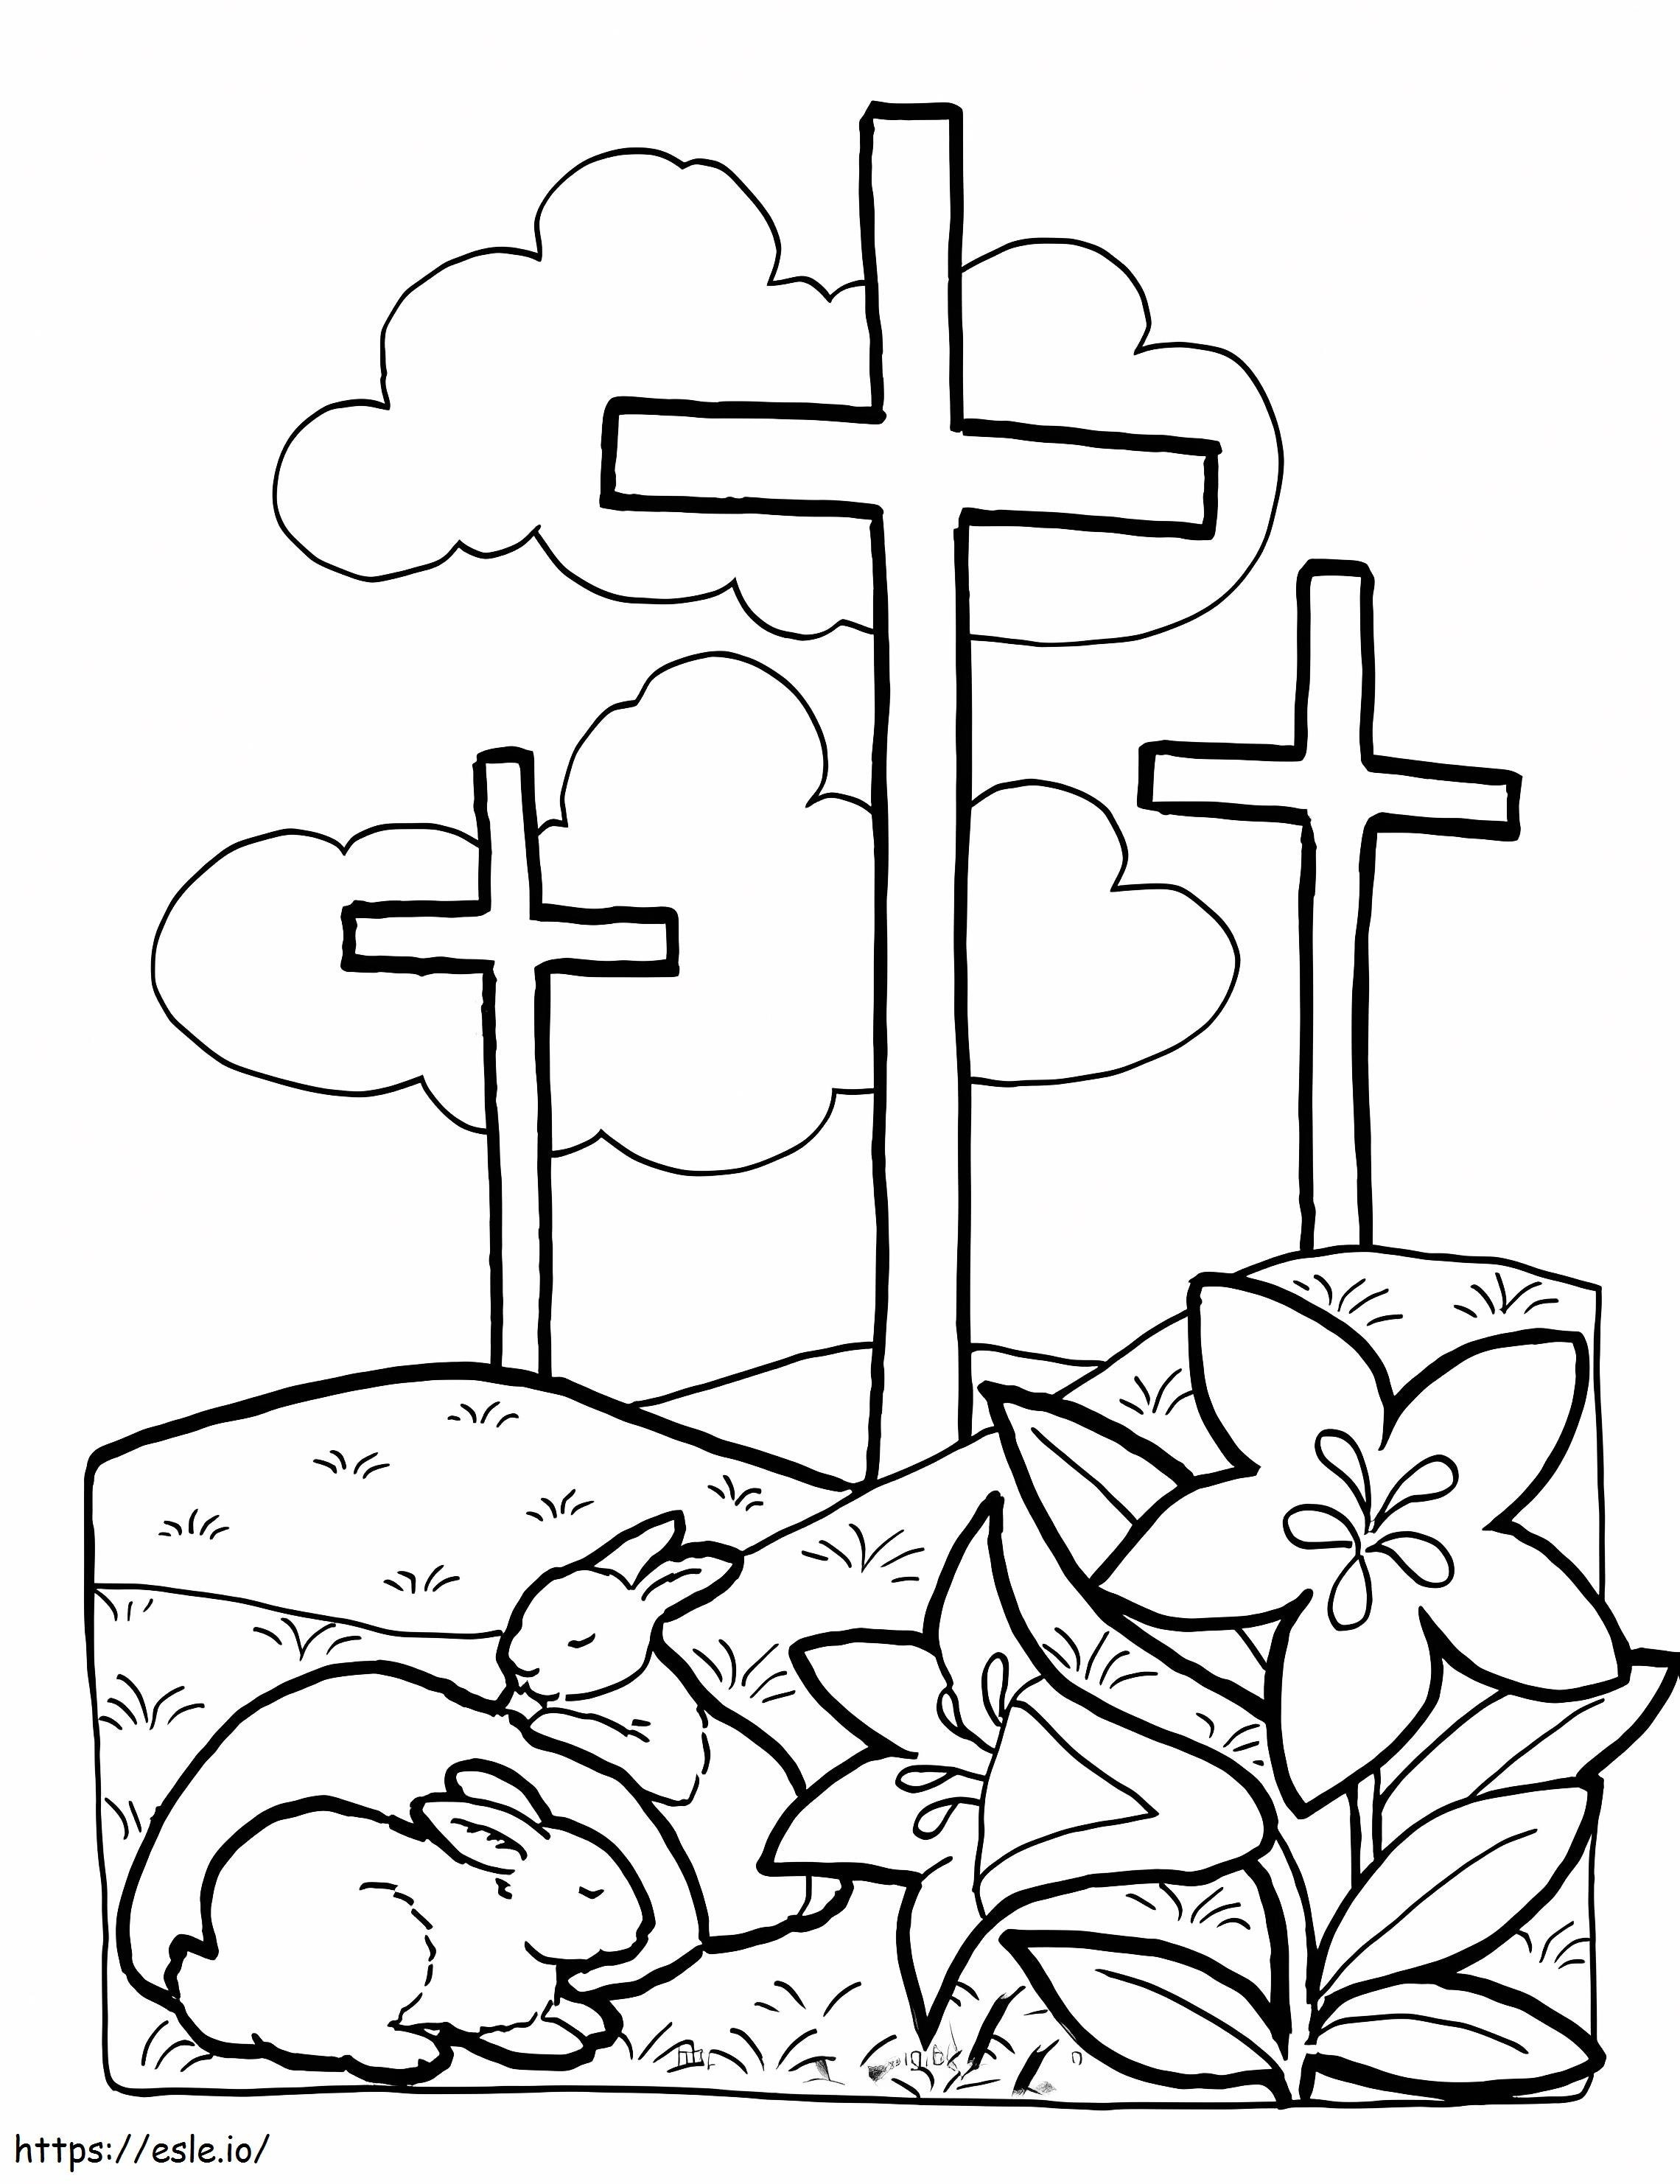 Good Friday coloring page